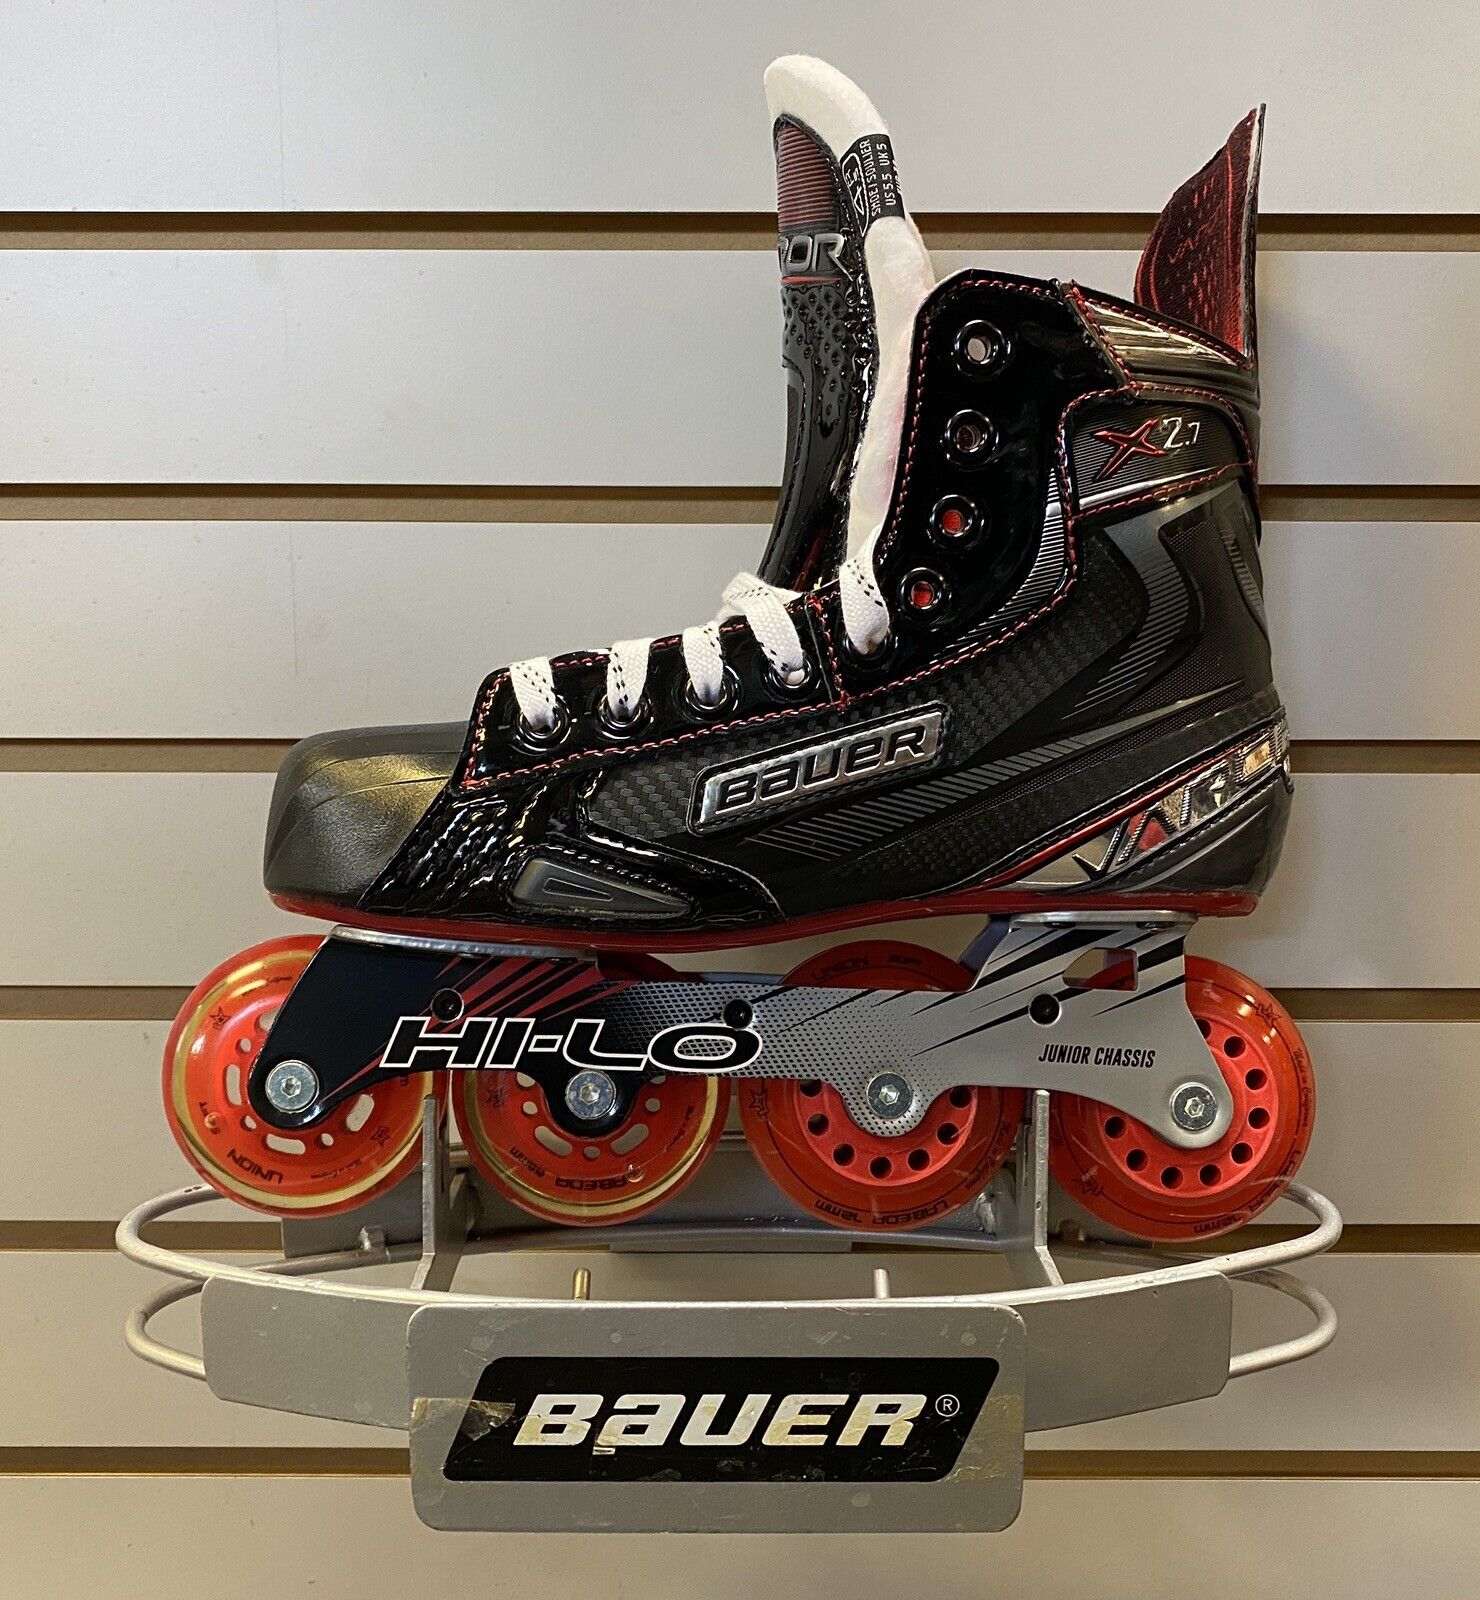 Looking to Buy Bauer Skates This Year: Discover the Best Bauer Rollerblades, Skates and More for Hockey Players